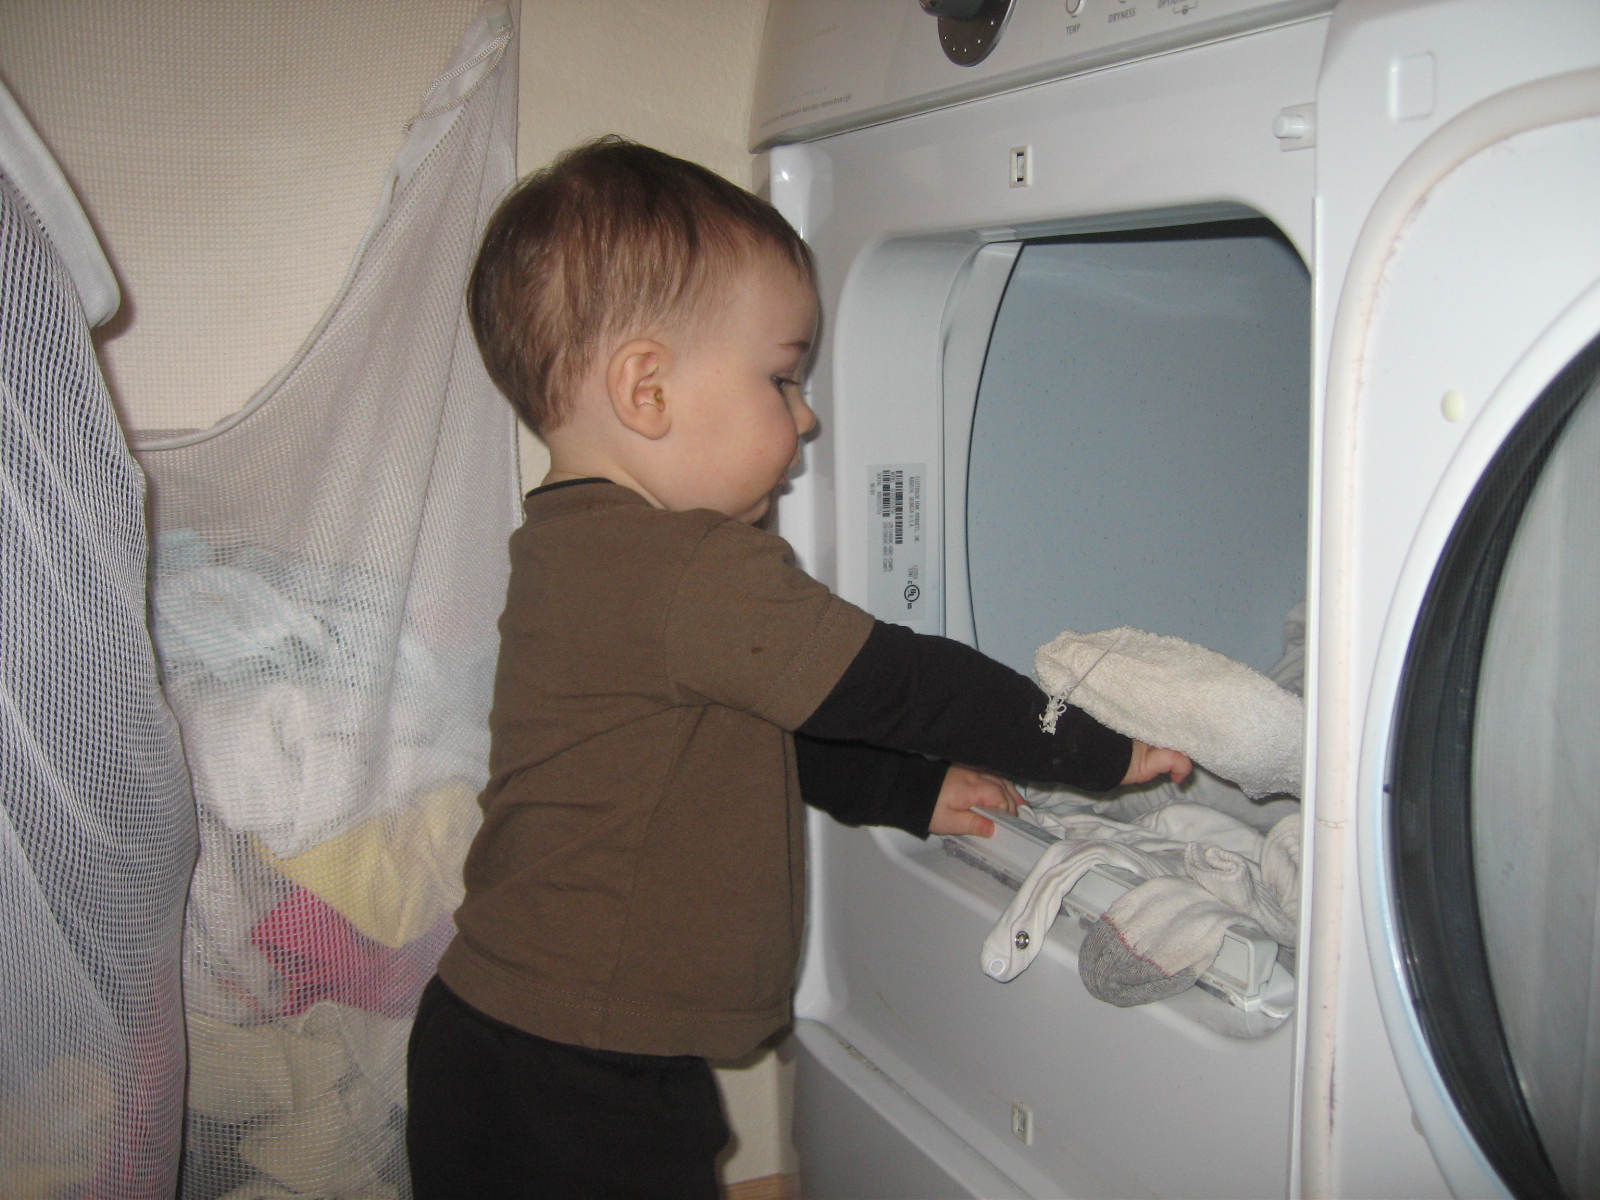 [Byren+helping+with+laundry+2-3-07+004.jpg]